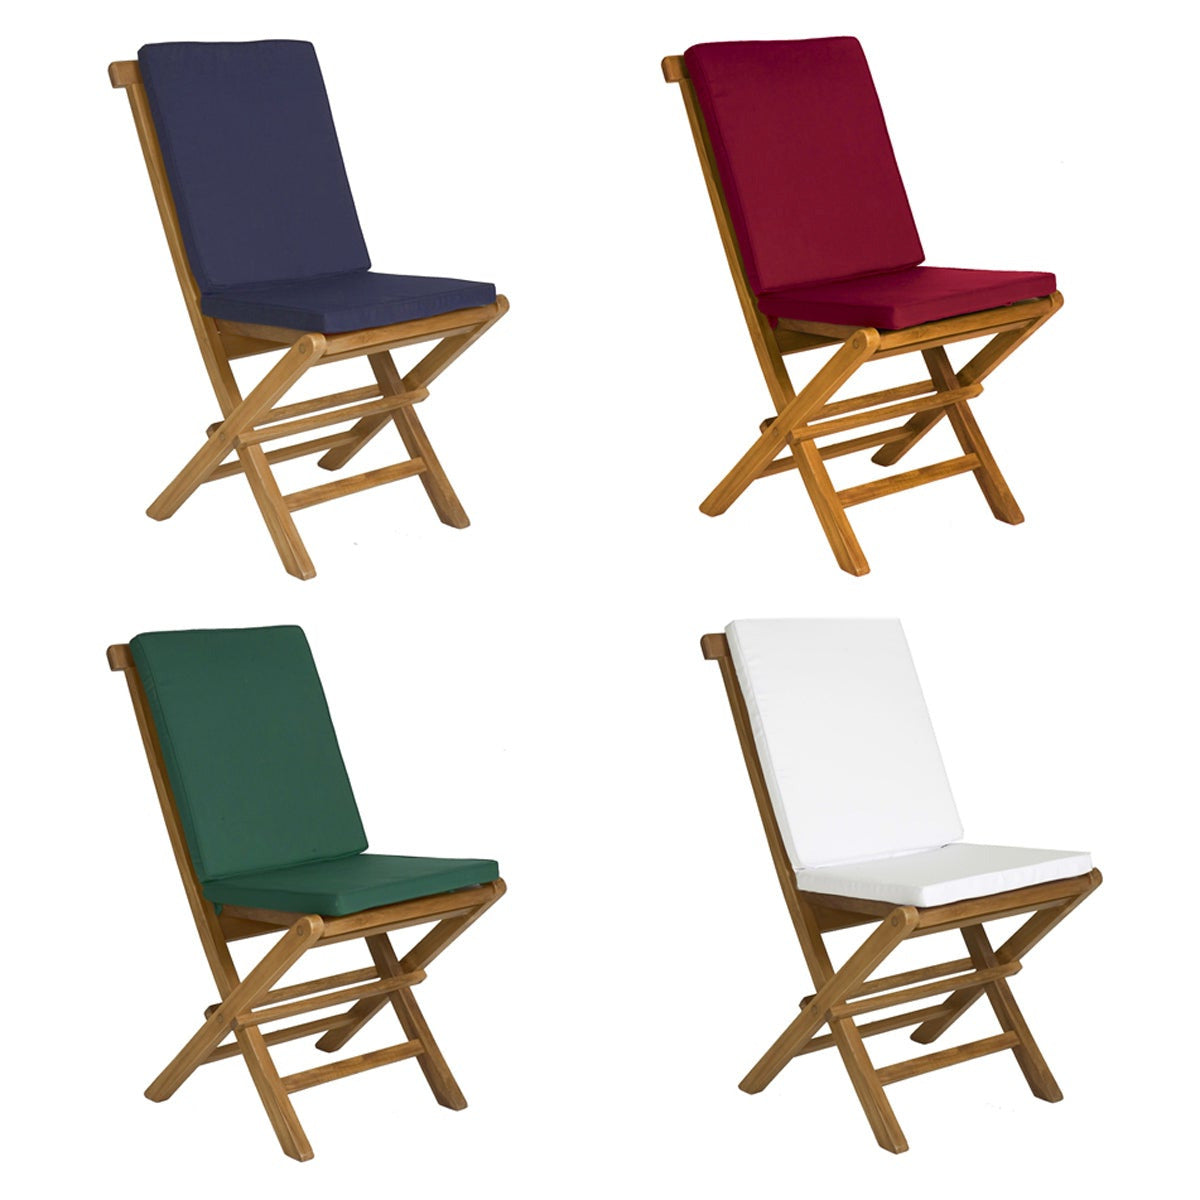 Teak Folding Chairs with Cushions